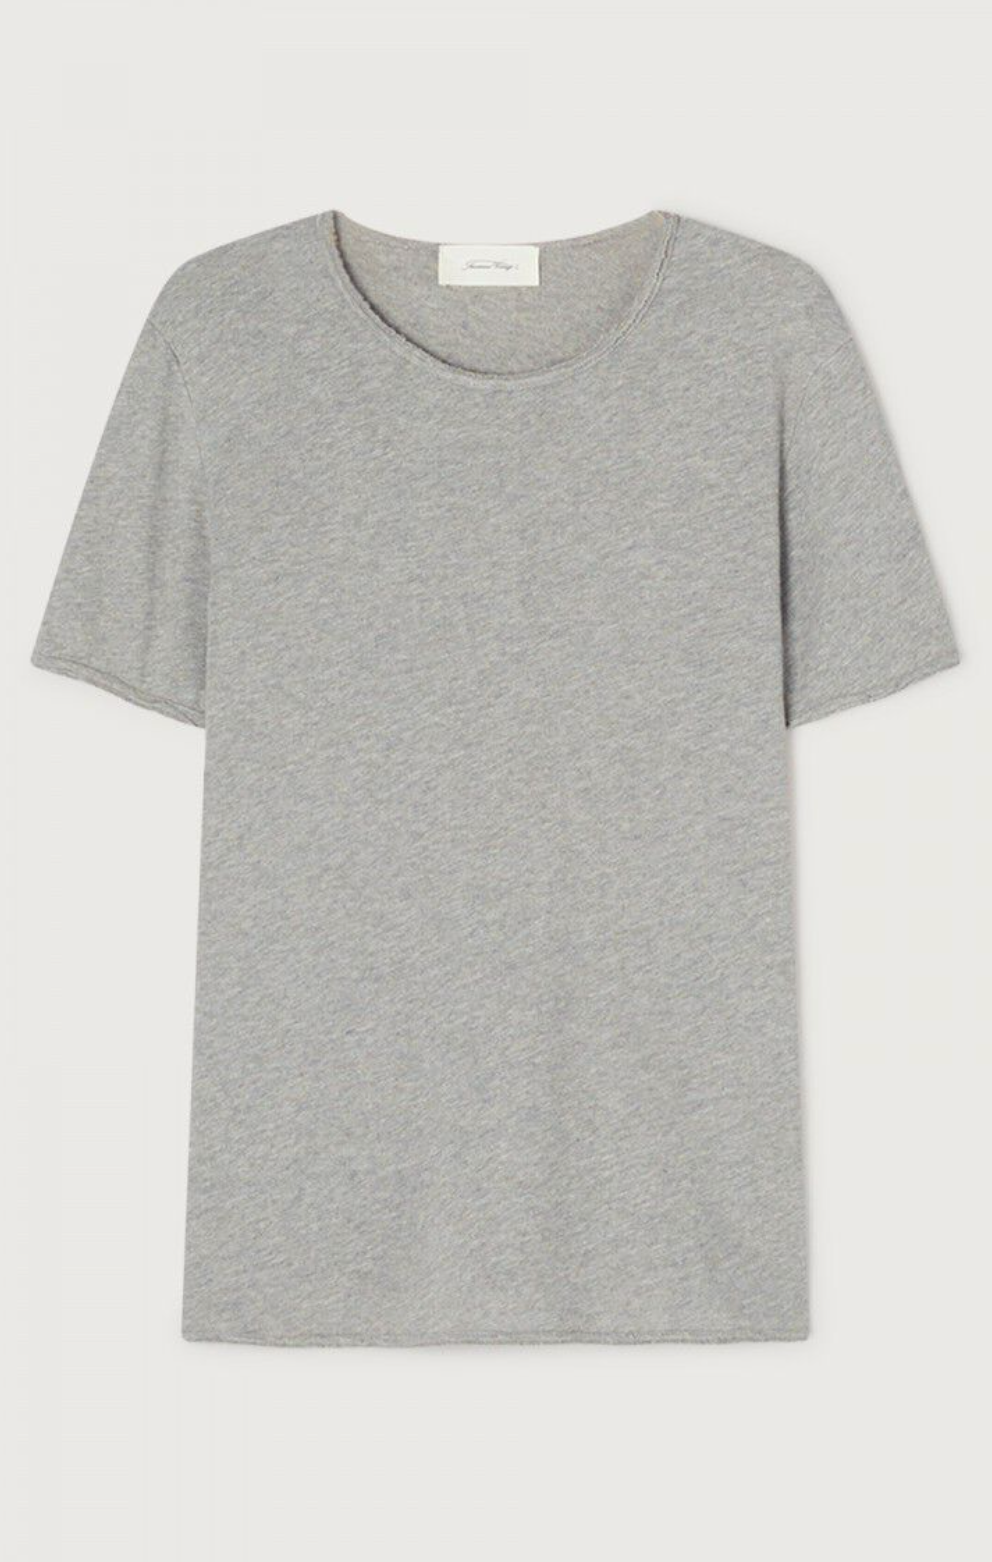 A flat lay image of the sonoma tee shirt in grey